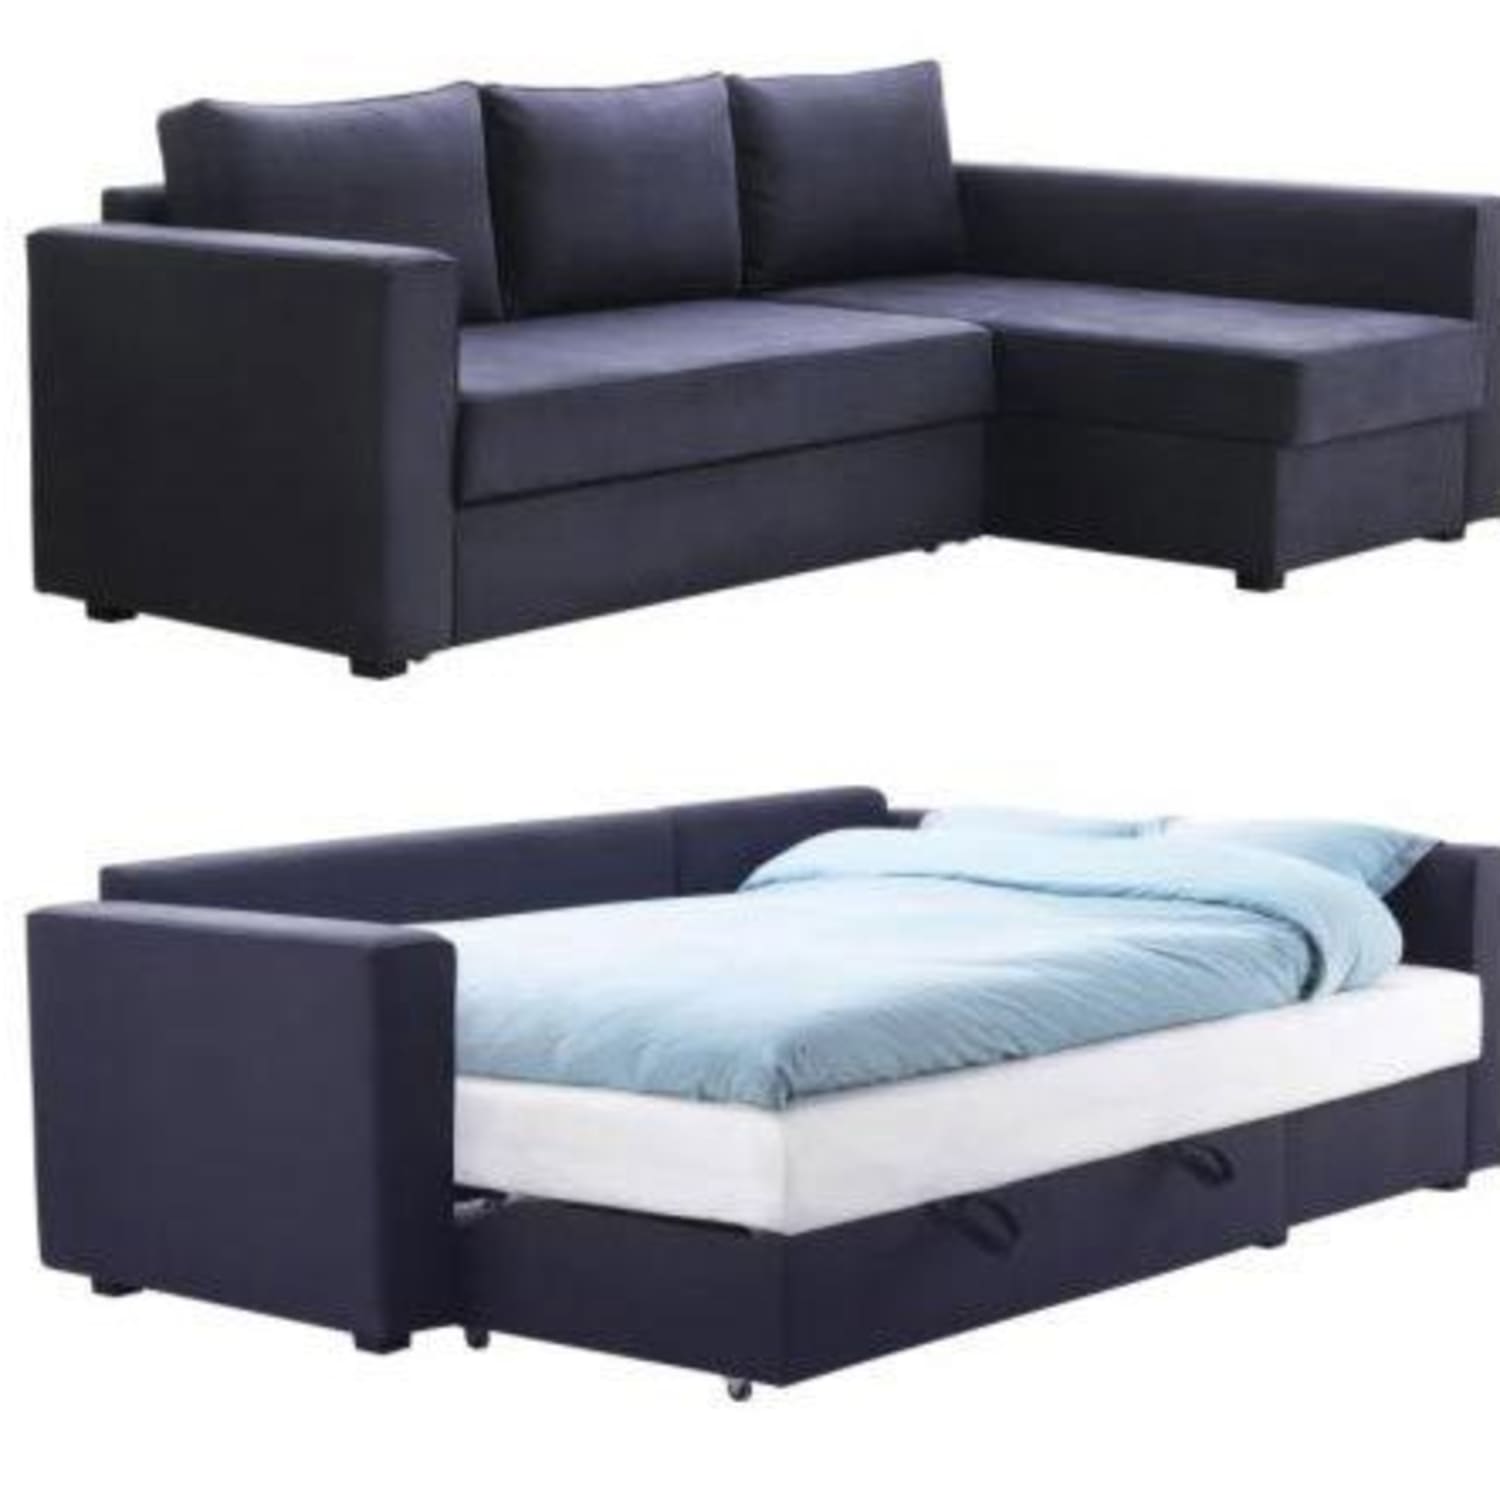 MANSTAD Sectional Sofa Bed & Storage from IKEA Therapy